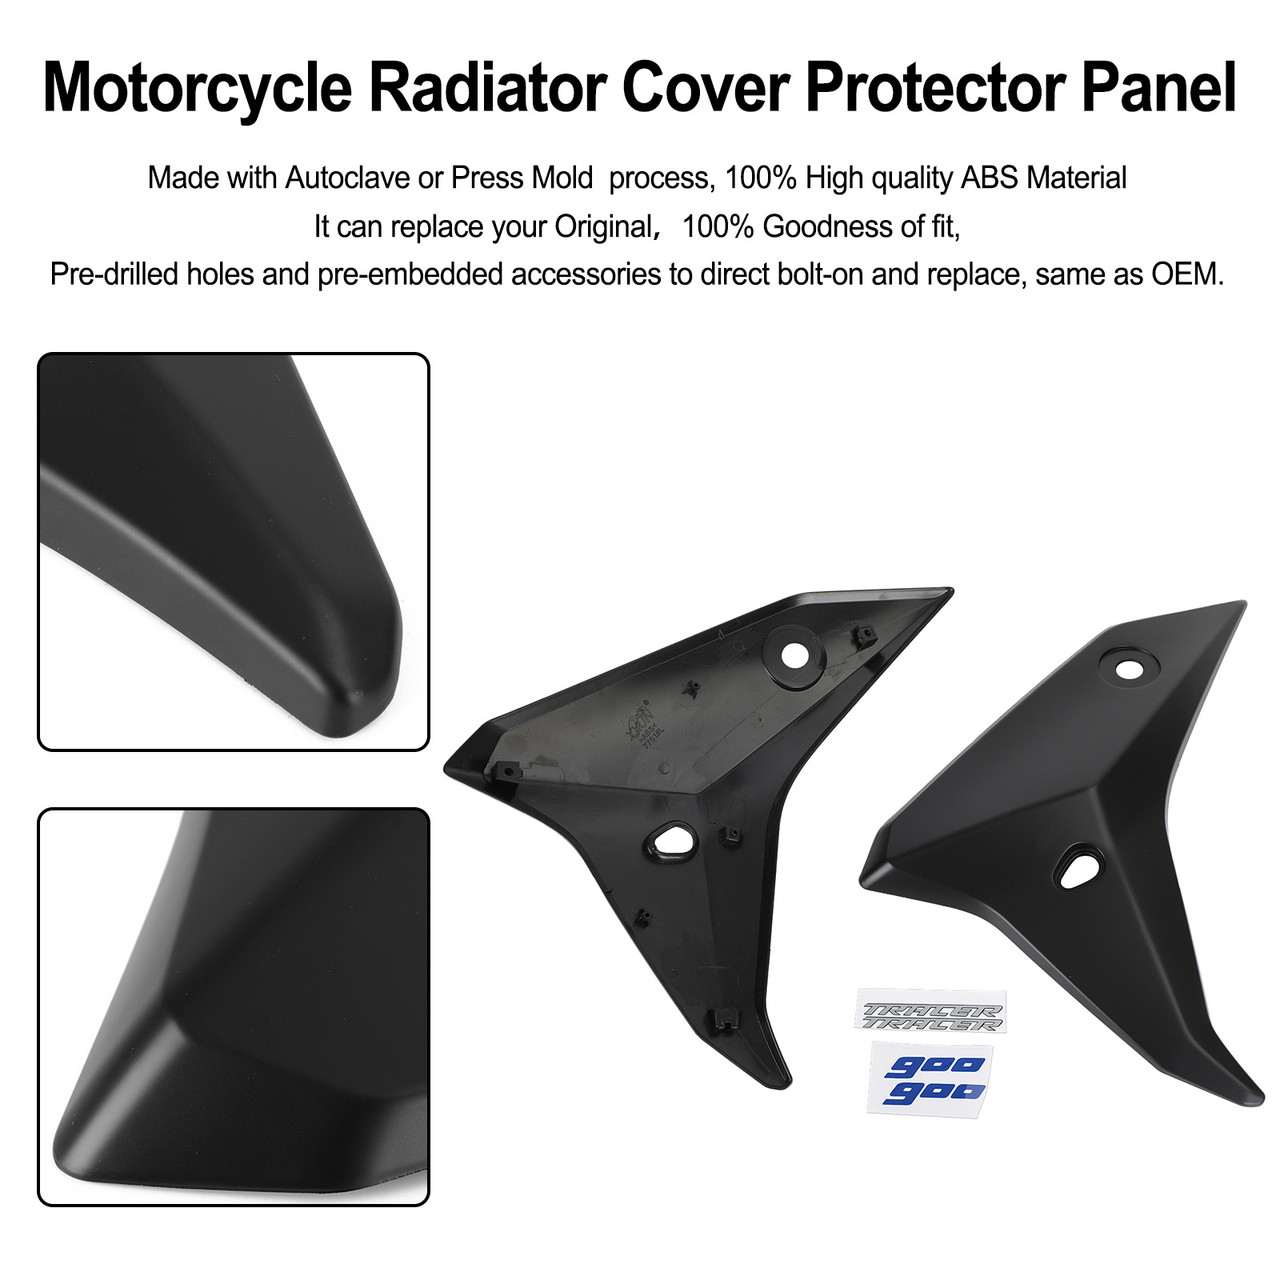 Motorcycle Radiator Cover Protector Panel fit for YAMAHA tracer 900 GT 2018-2020 Black